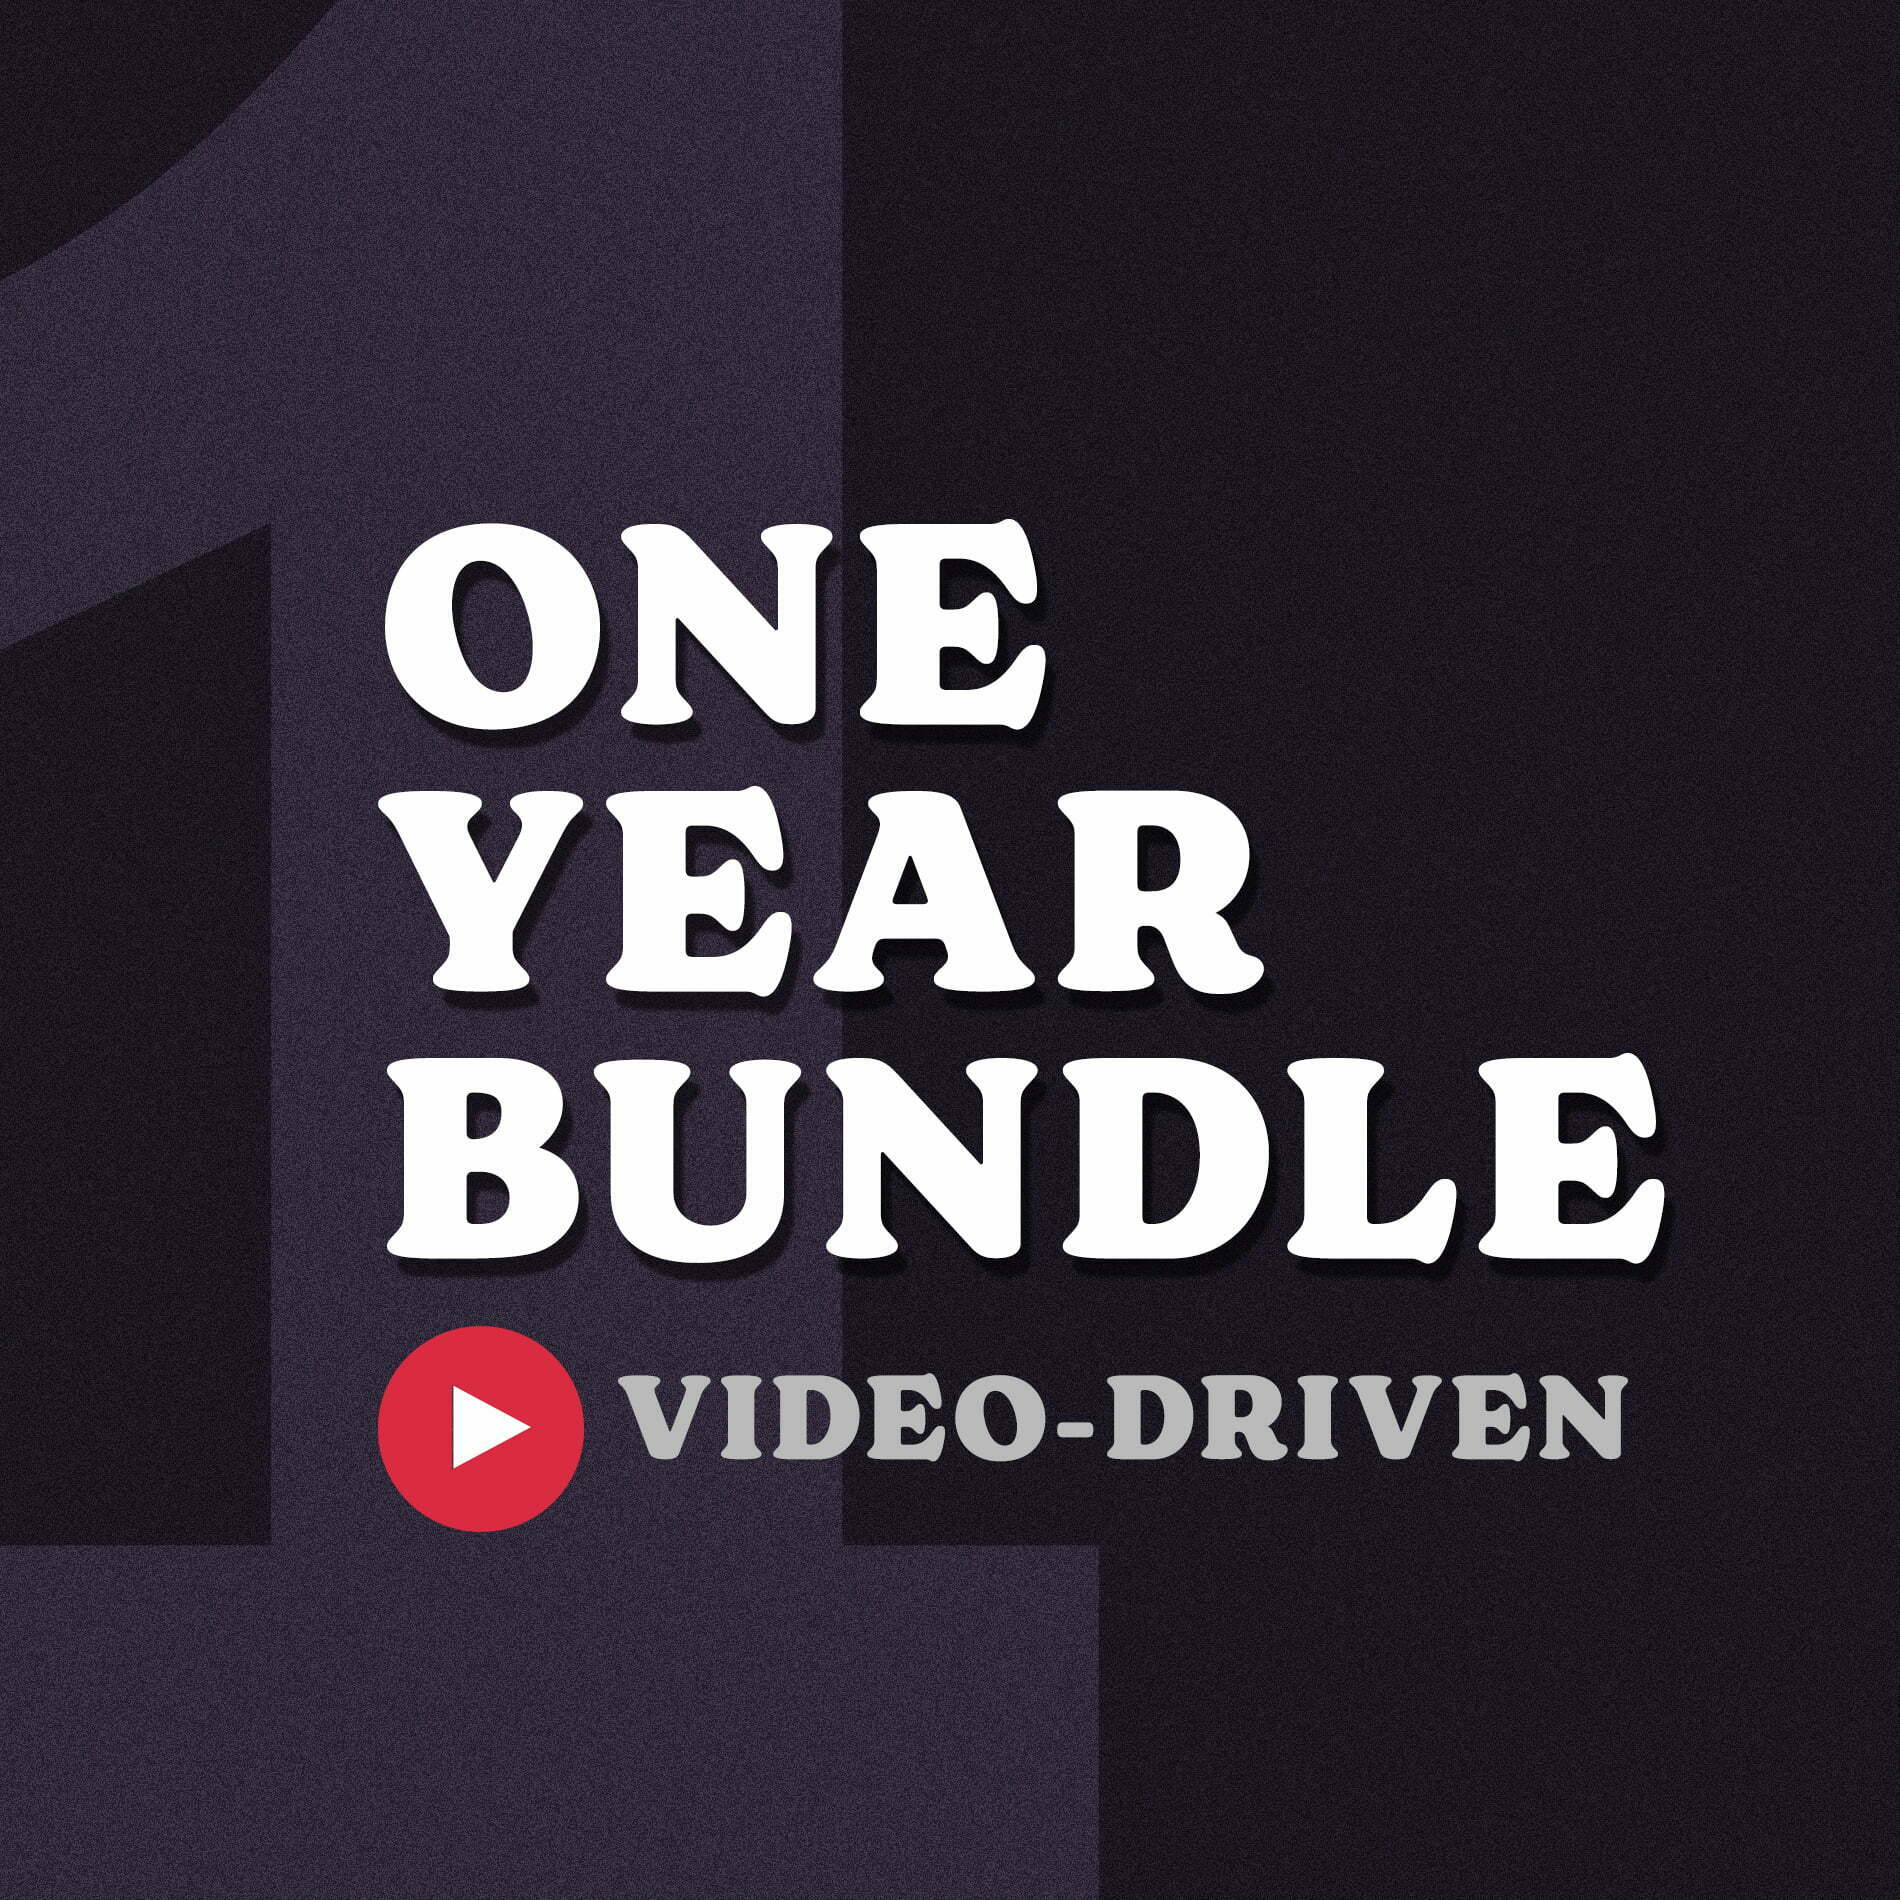 Product image for One Year Video-Driven Curriculum Bundle